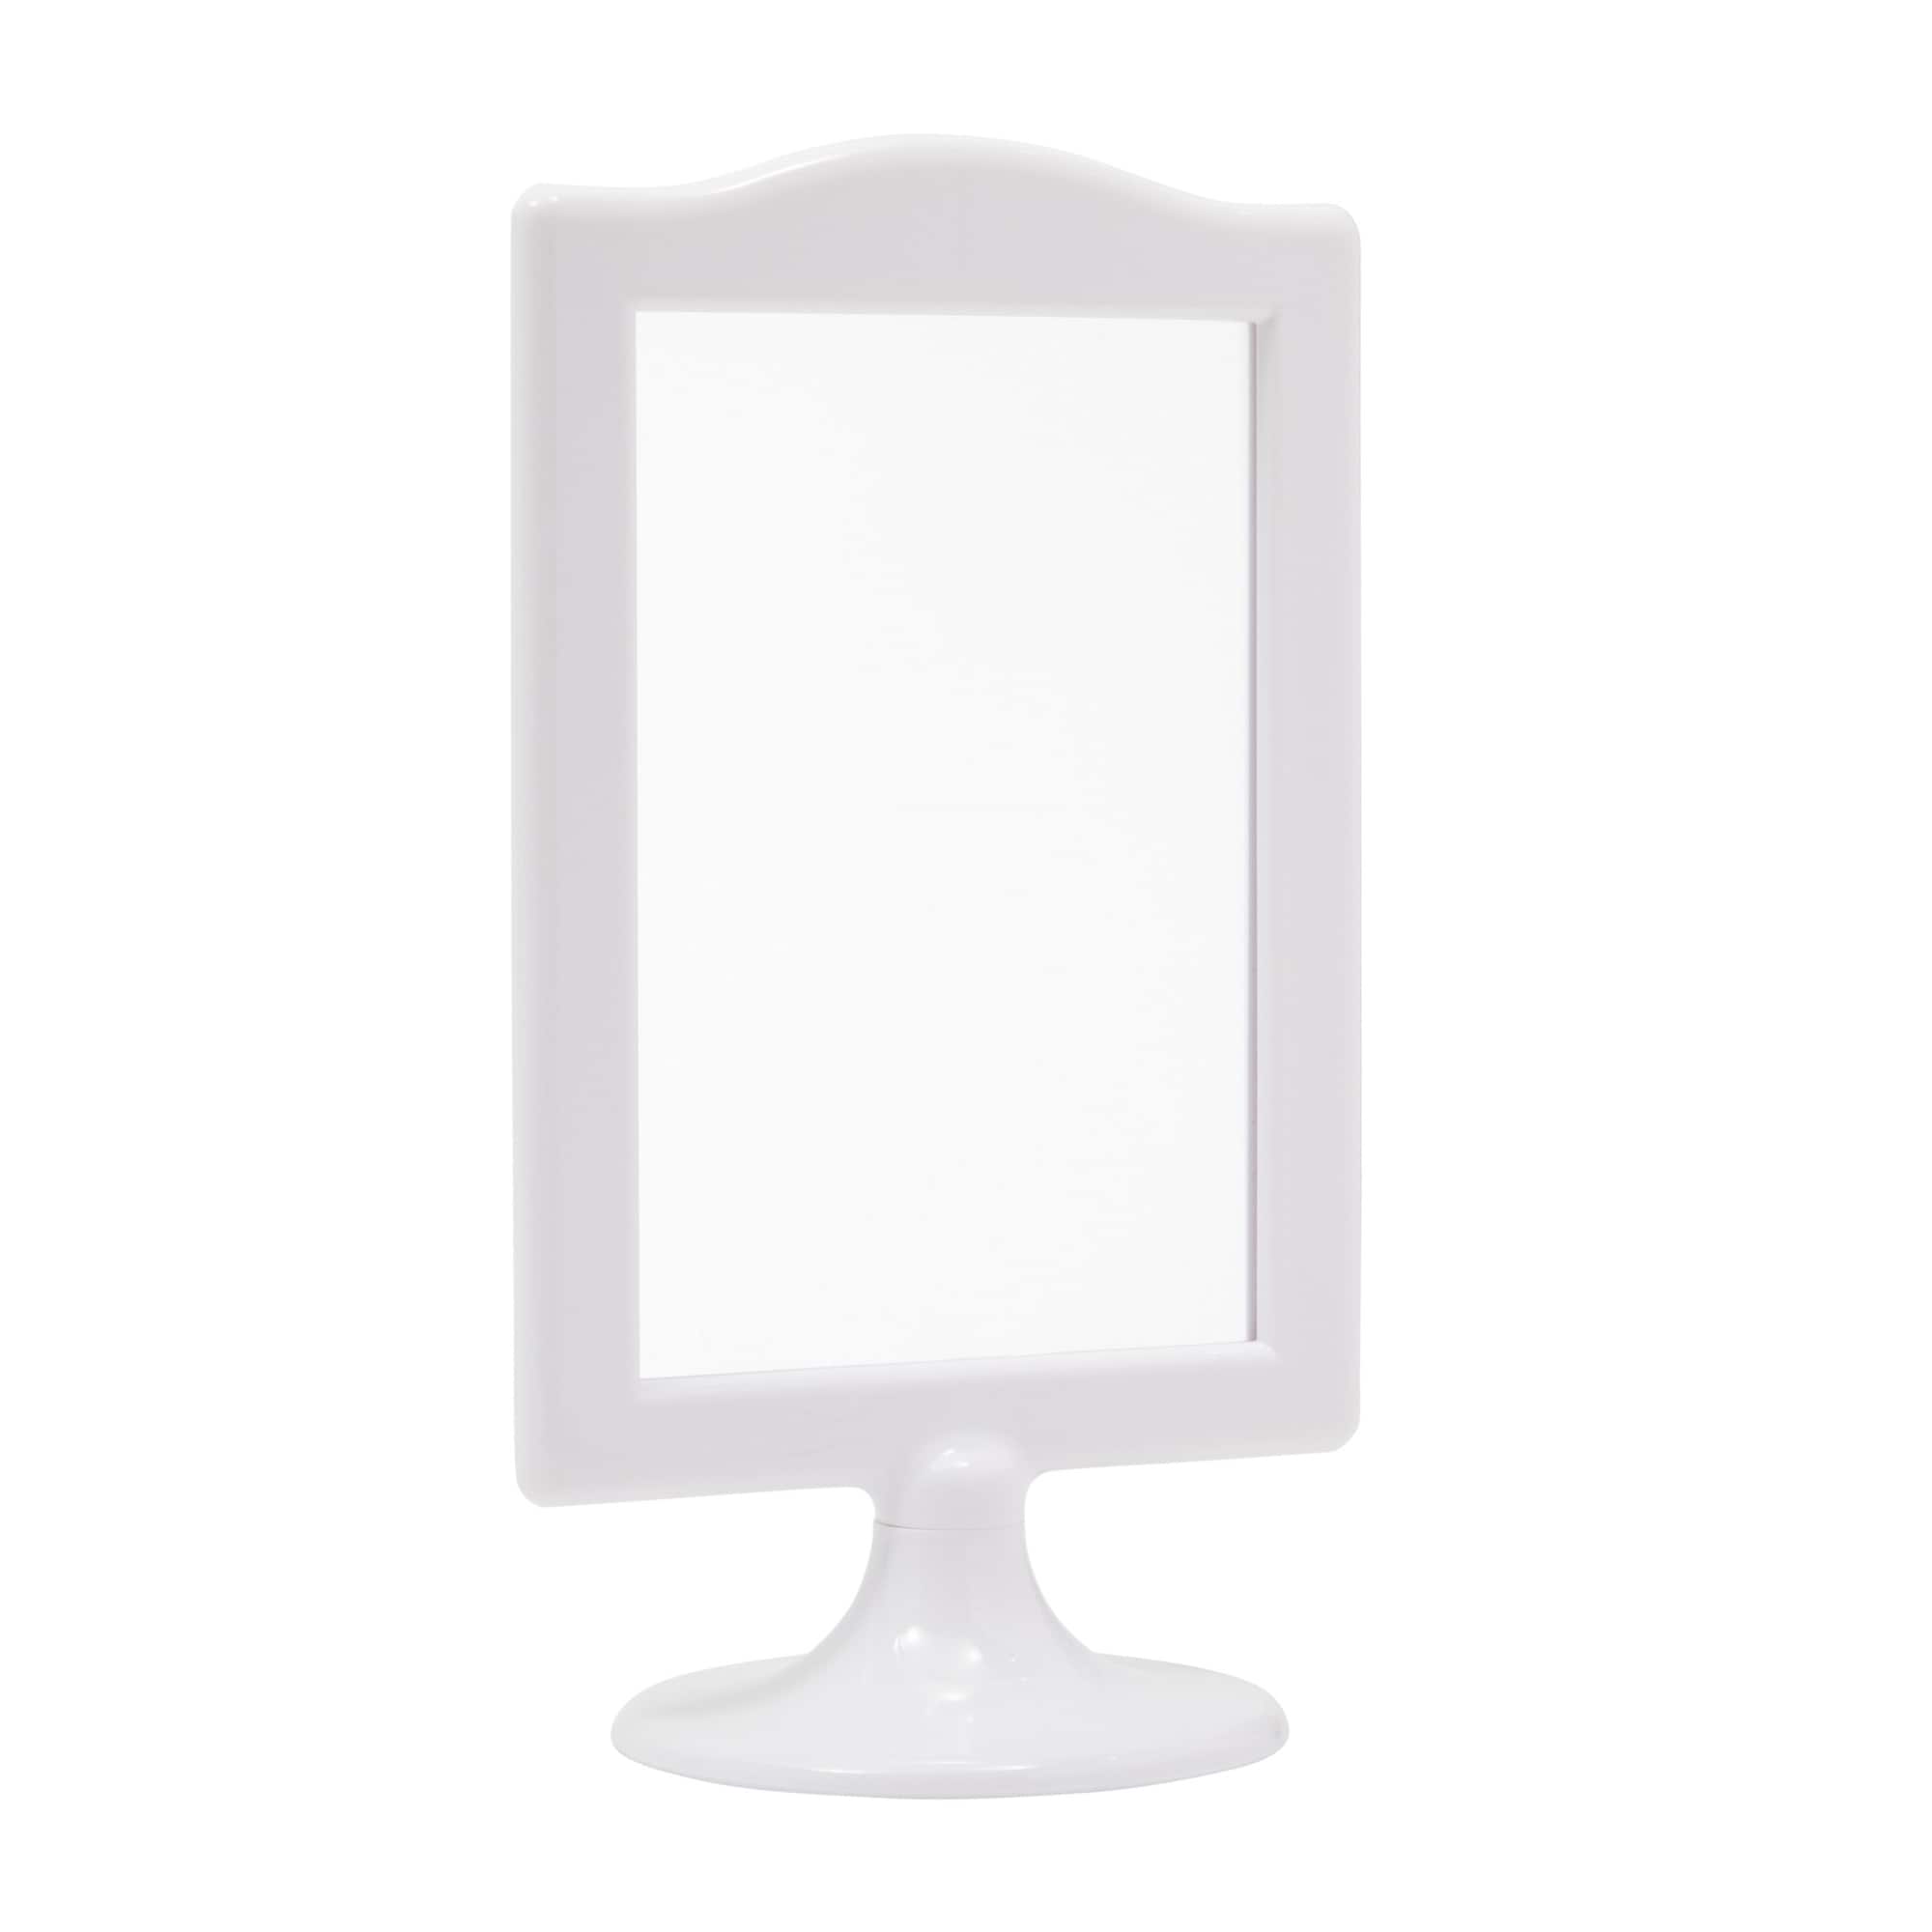 https://ak1.ostkcdn.com/images/products/is/images/direct/cb97c17288ea44fe89fbb77f8b0a2c9df580b535/Double-Sided-Pedestal-Picture-Frames-for-4x6-Inch-Photos-%28White%2C-10-Pack%29.jpg